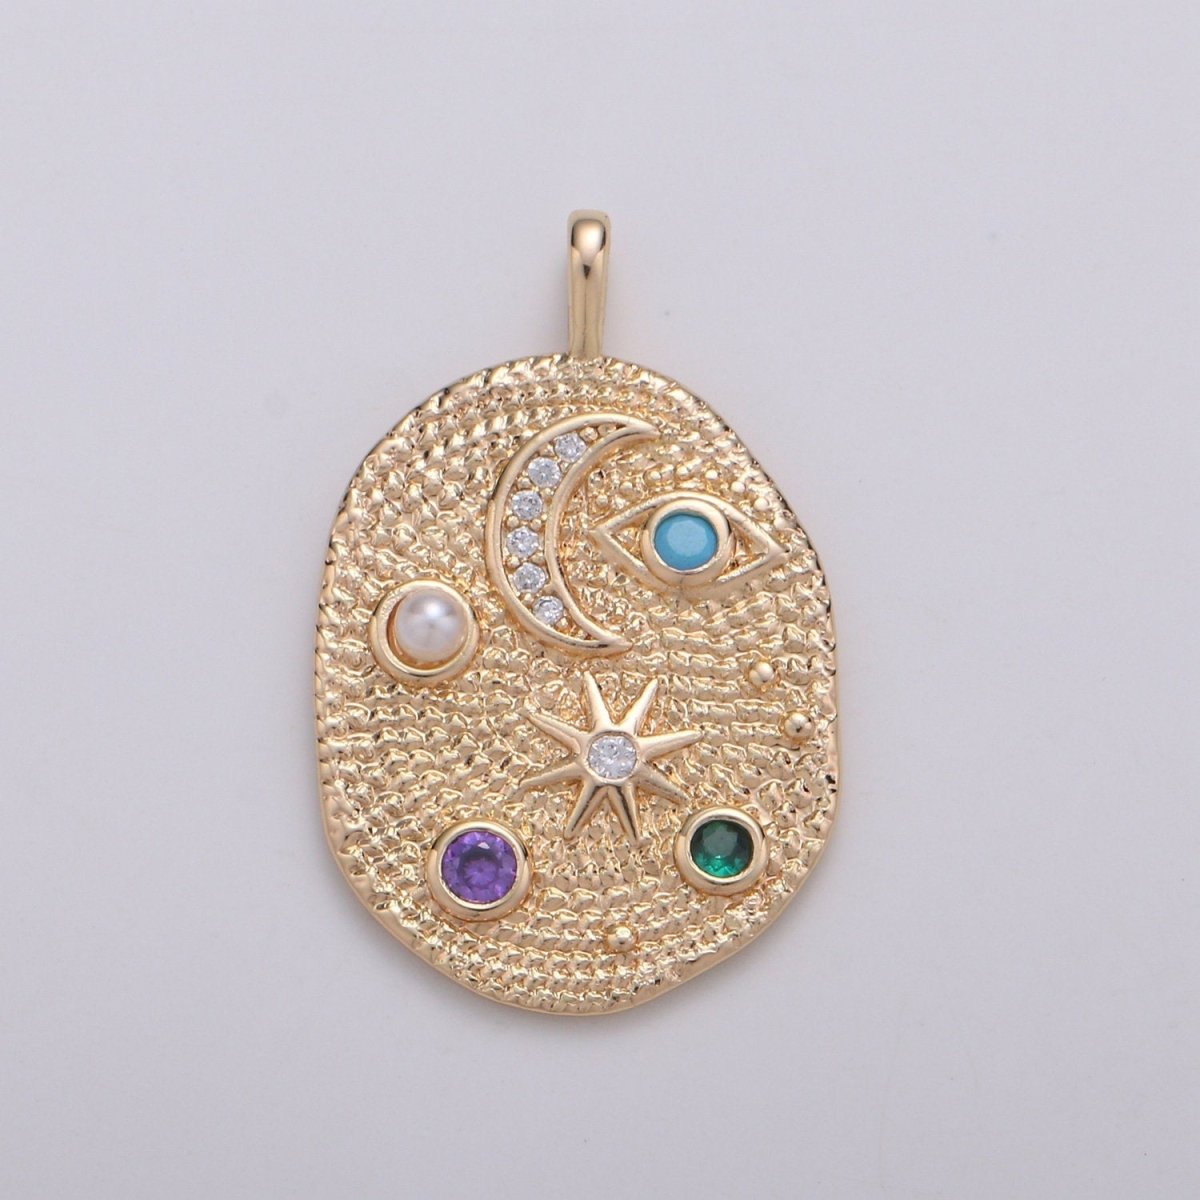 Pearl and Multi color CZ Planet in the Ovum Universe Pendant 14K gold Filled Charm, Star, Crescent Moon, Galaxy, DIY Jewelry Necklace making, D-739 - DLUXCA